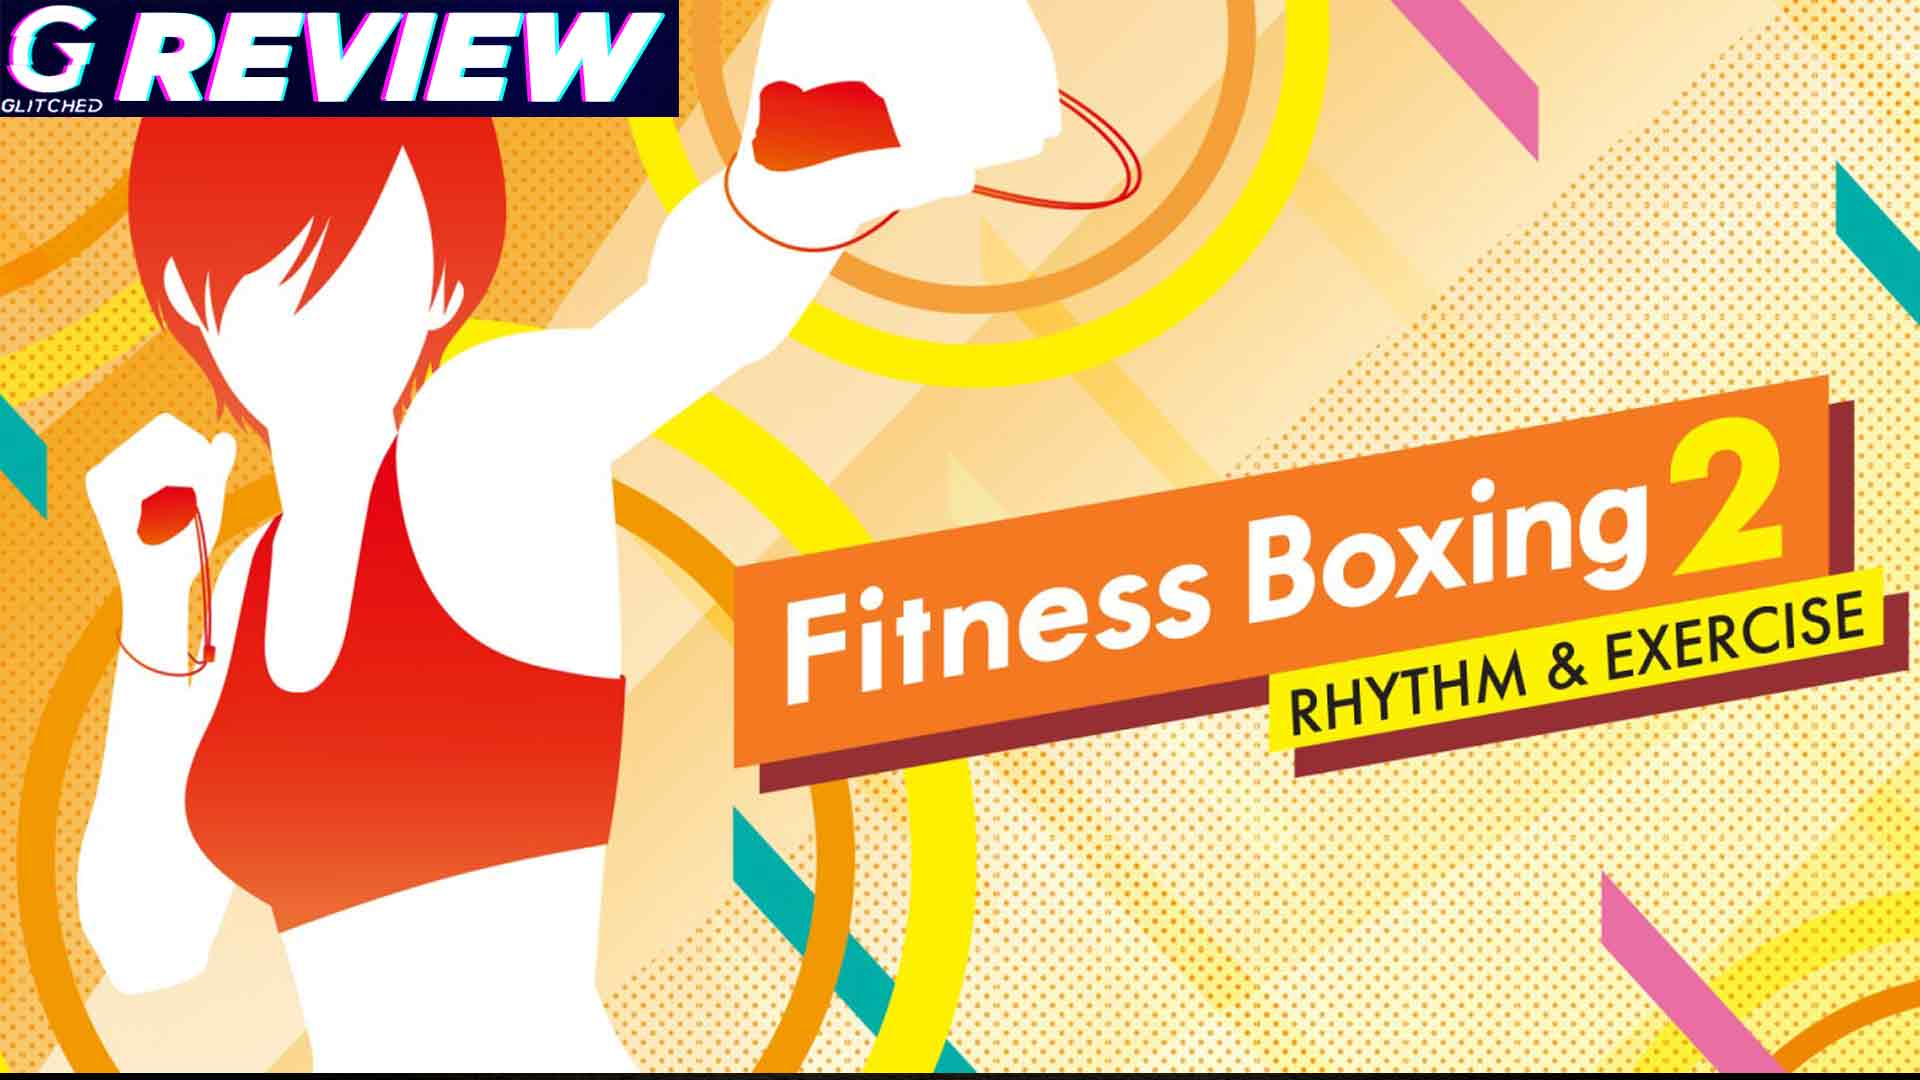 Fitness Boxing 2: Rhythm & Exercise Review